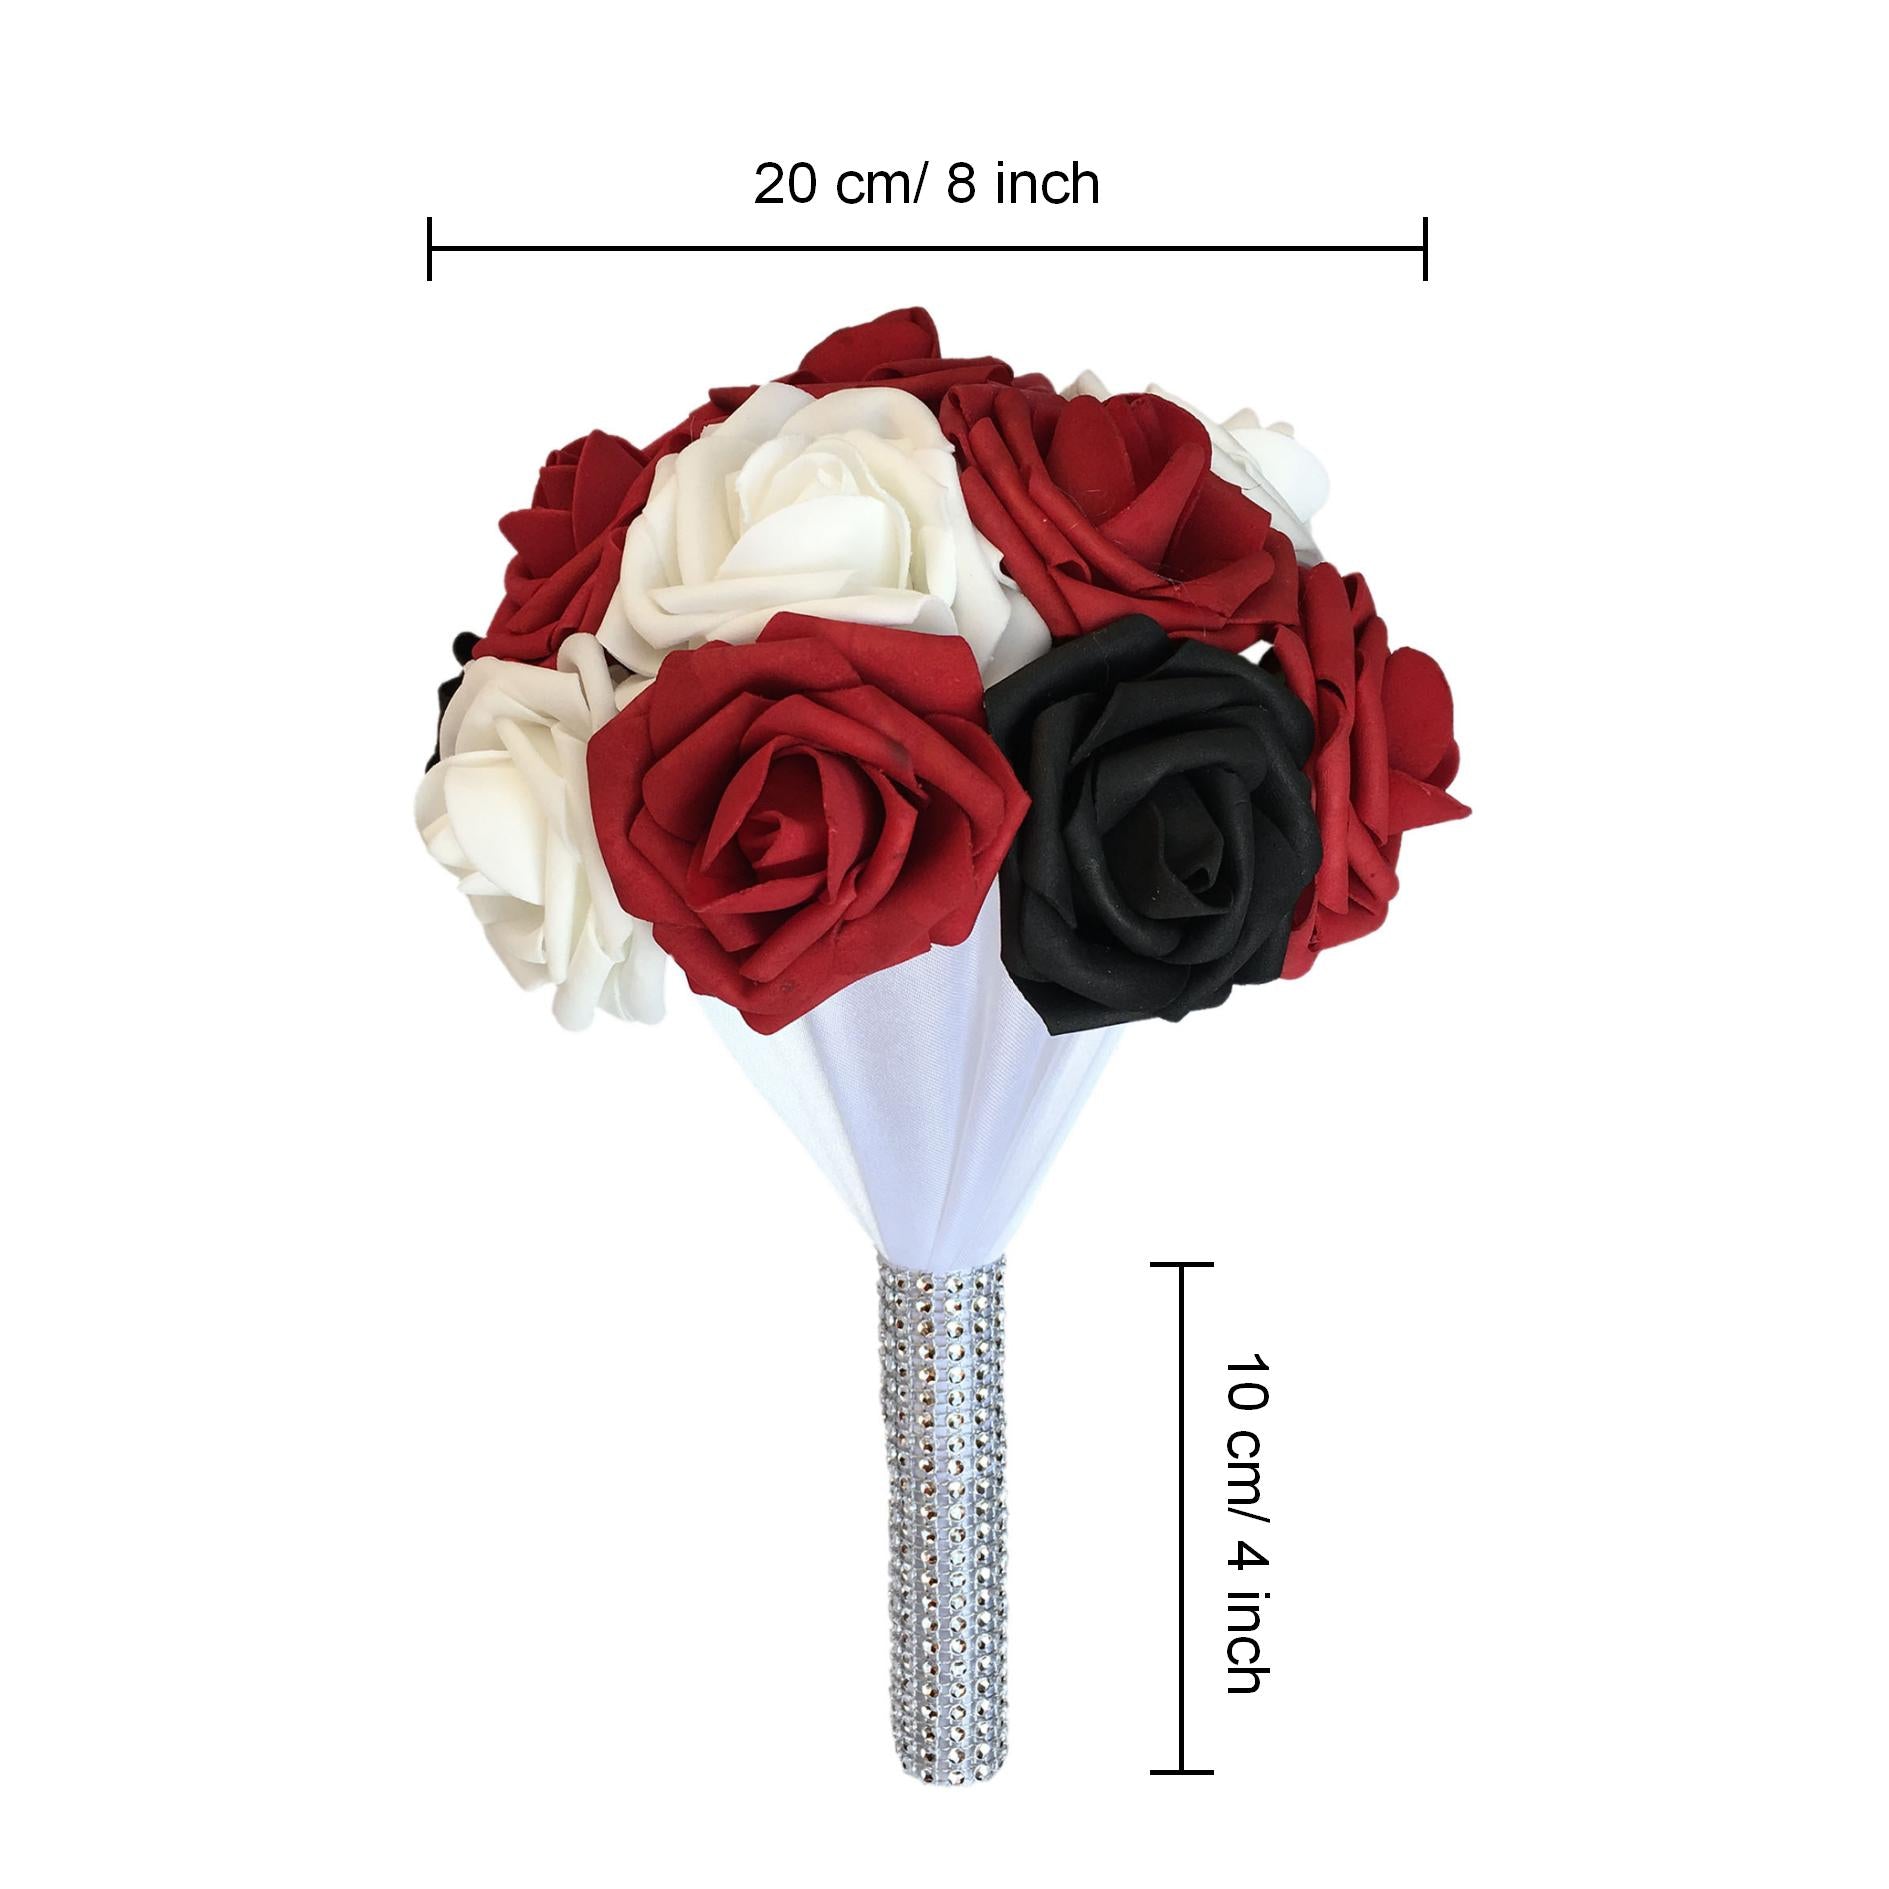 Wedding Bouquets Package for 5 Bridesmaids Dark Red Black White Roses